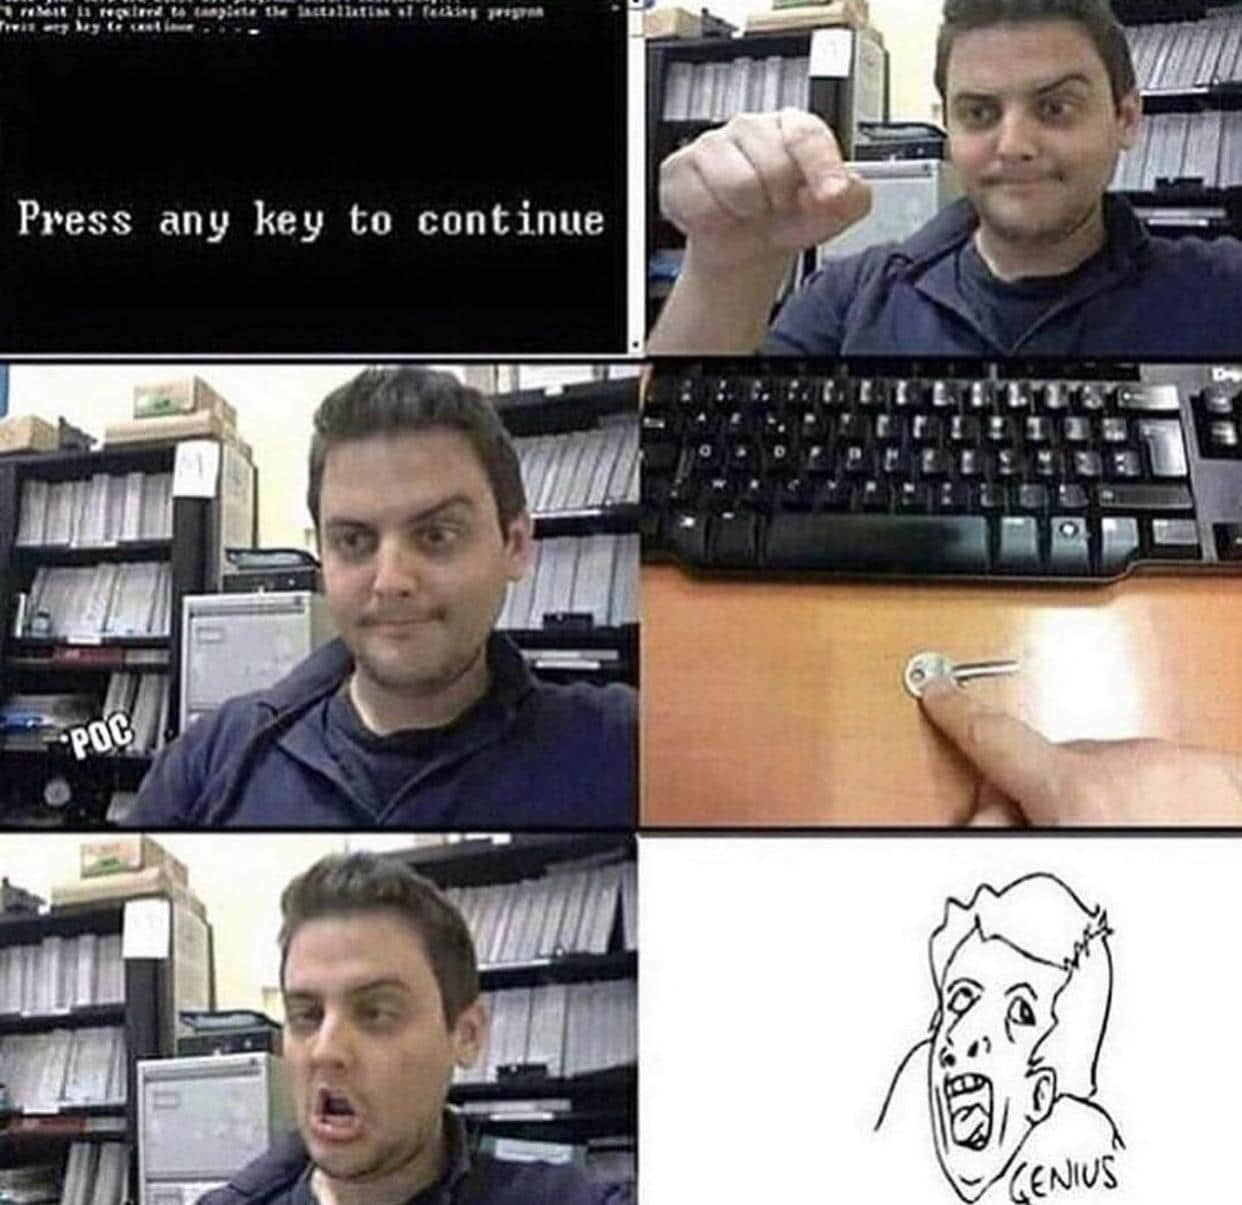 Cringe, LOL, TotesMessenger, Schtick, POC, Clever cringe memes Cringe, LOL, TotesMessenger, Schtick, POC, Clever text: fit Press any key to continue 